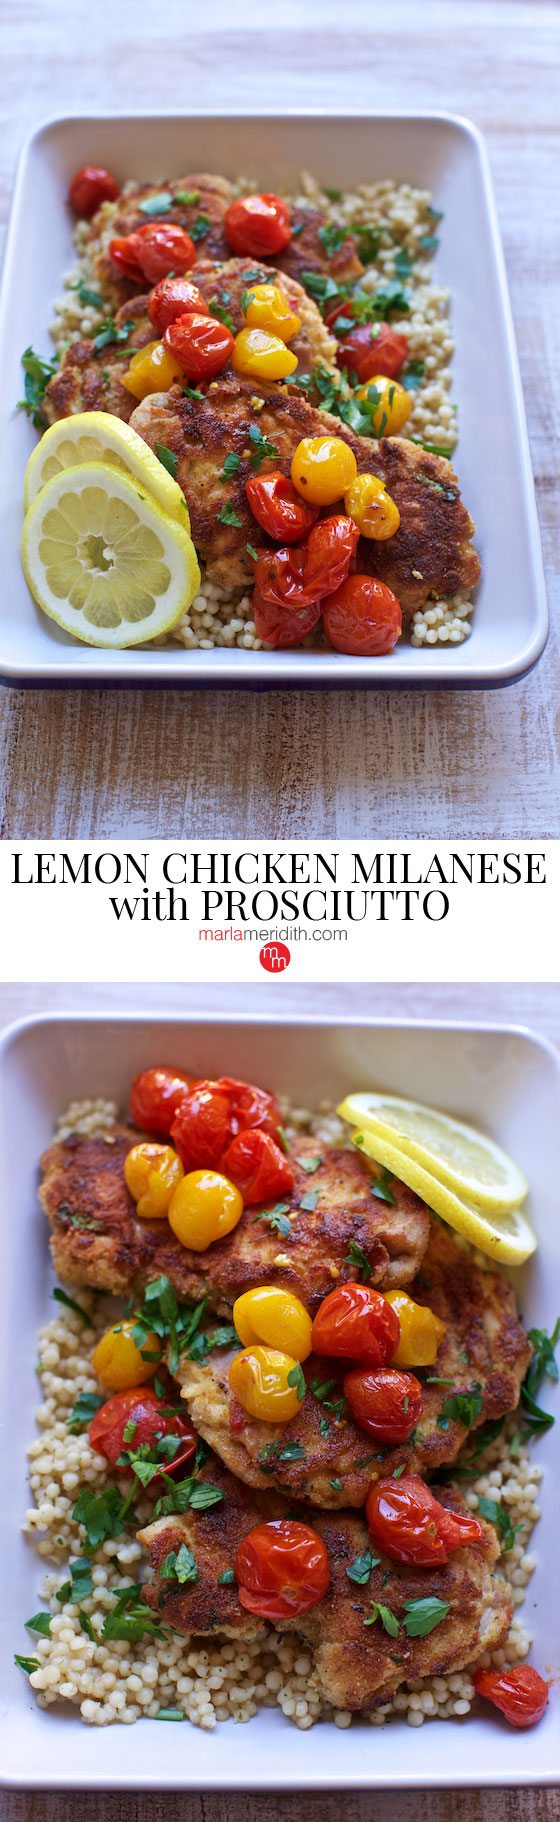 Winner winner chicken dinner! Add this LEMON CHICKEN MILANESE WITH PROSCIUTTO to your weeknight recipe rotation! MarlaMeridith.com ( @marlameridith )